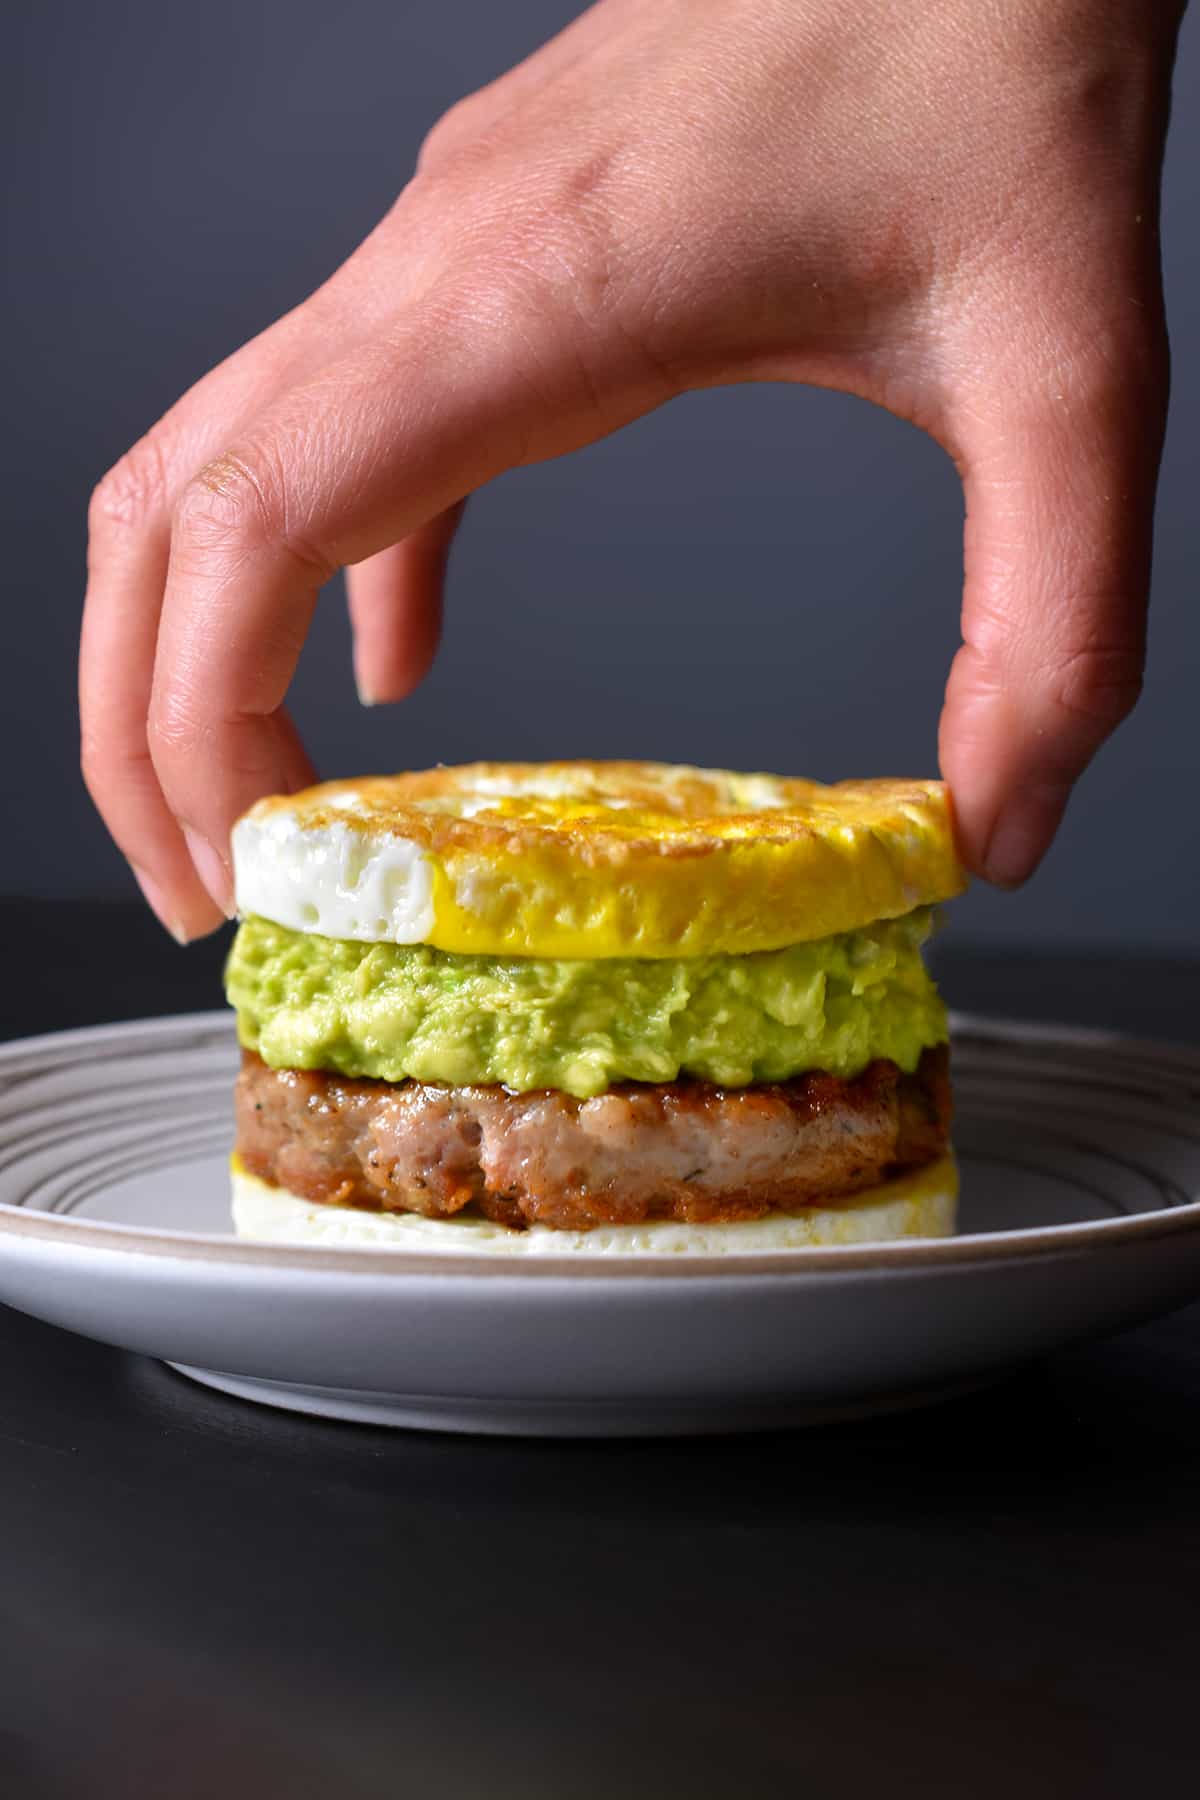 A hand is placing a fried egg on top of a sausage patty with guacamole.